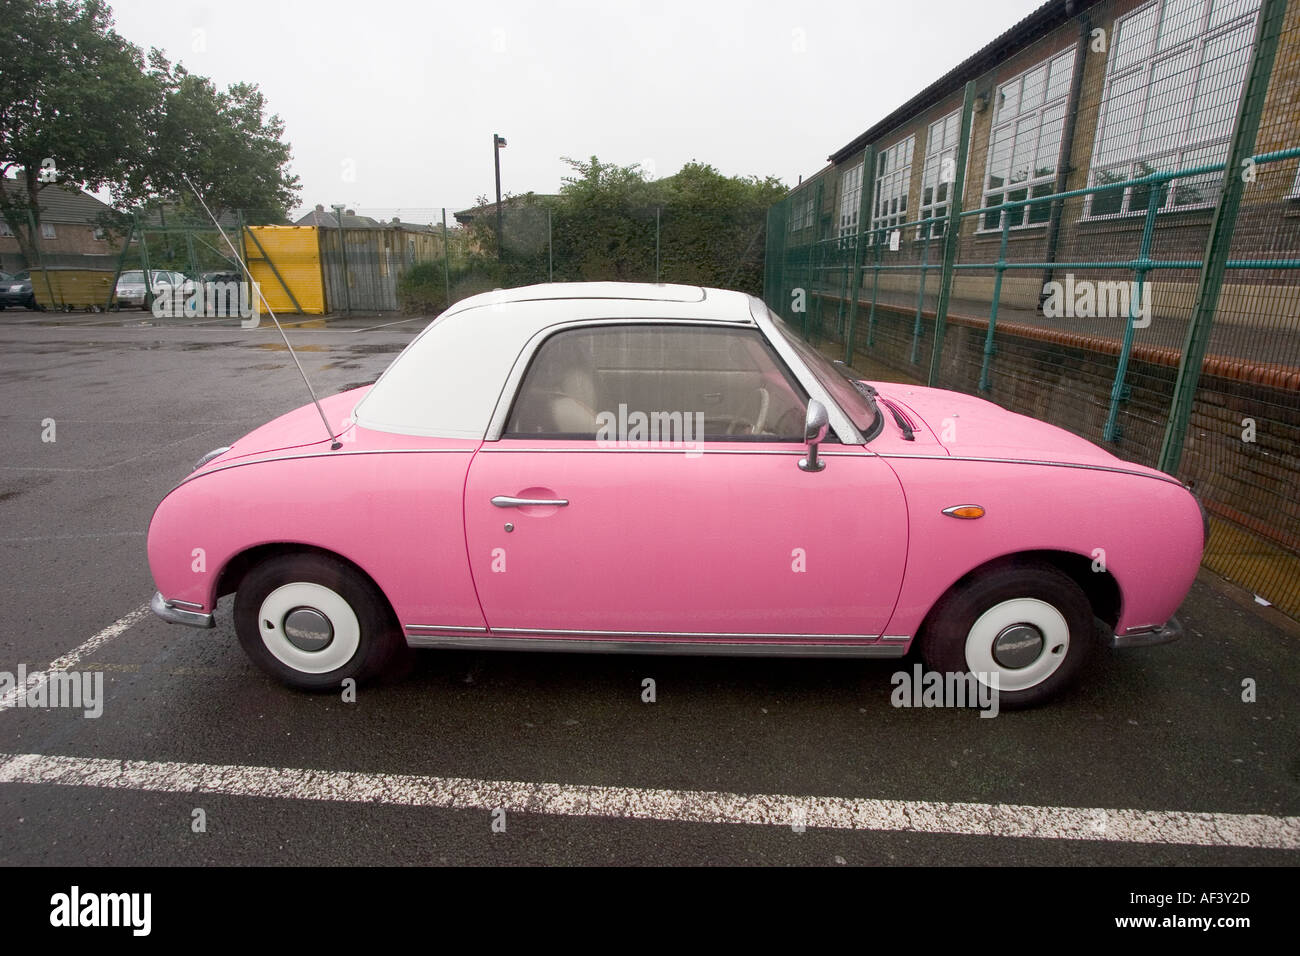 Pink and white two tone Nissan Figaro classic cult car Stock Photo